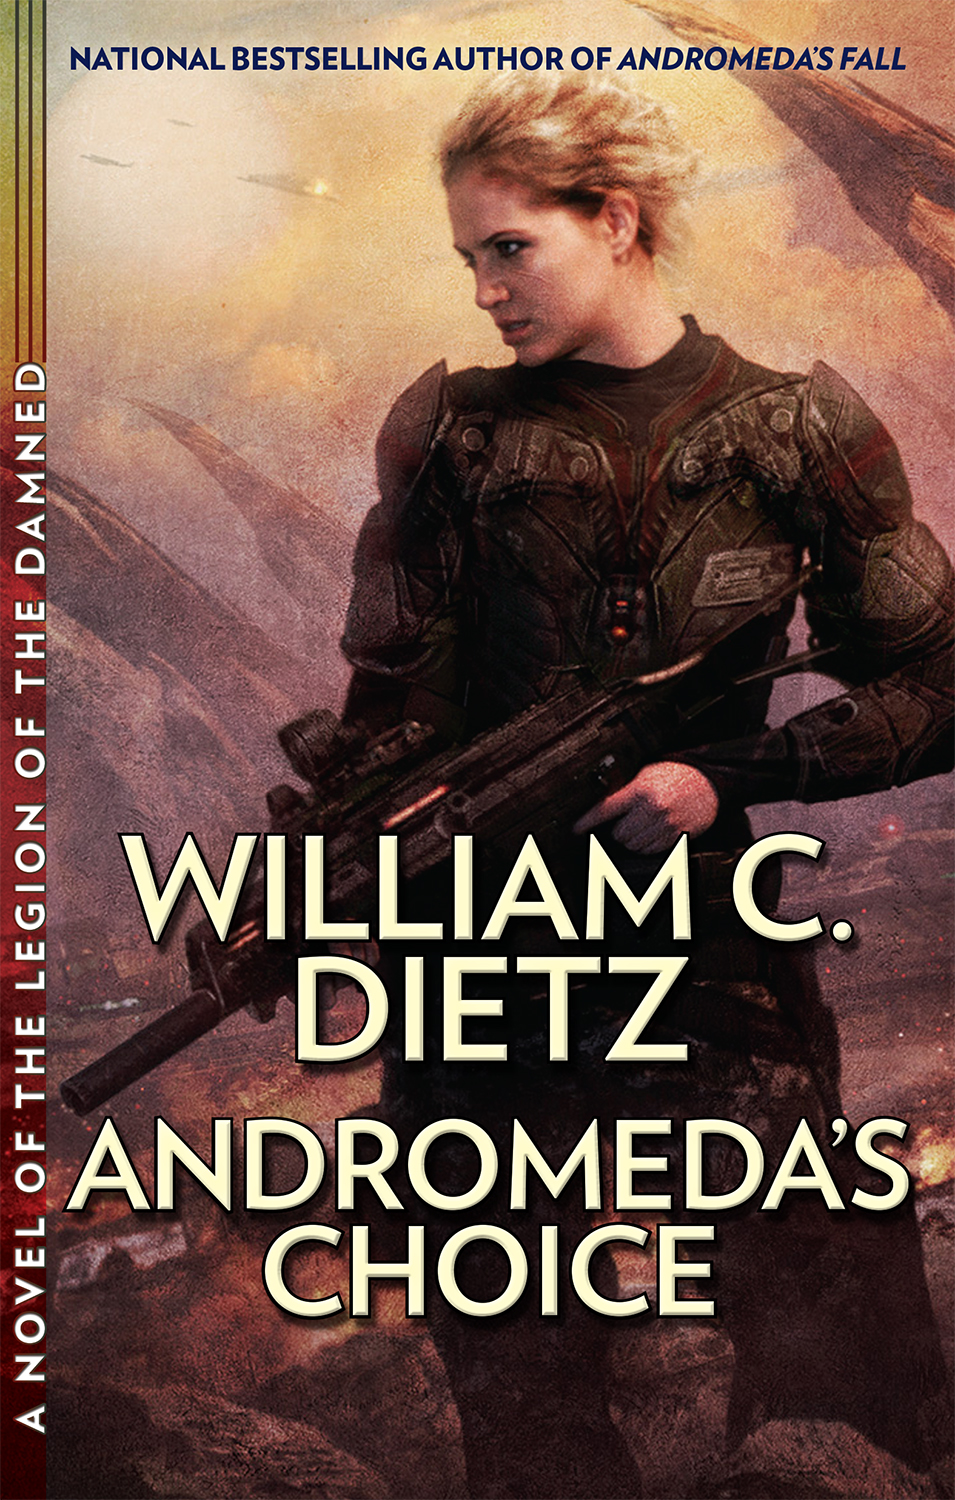 Andromeda’s Choice (2013) by William C. Dietz